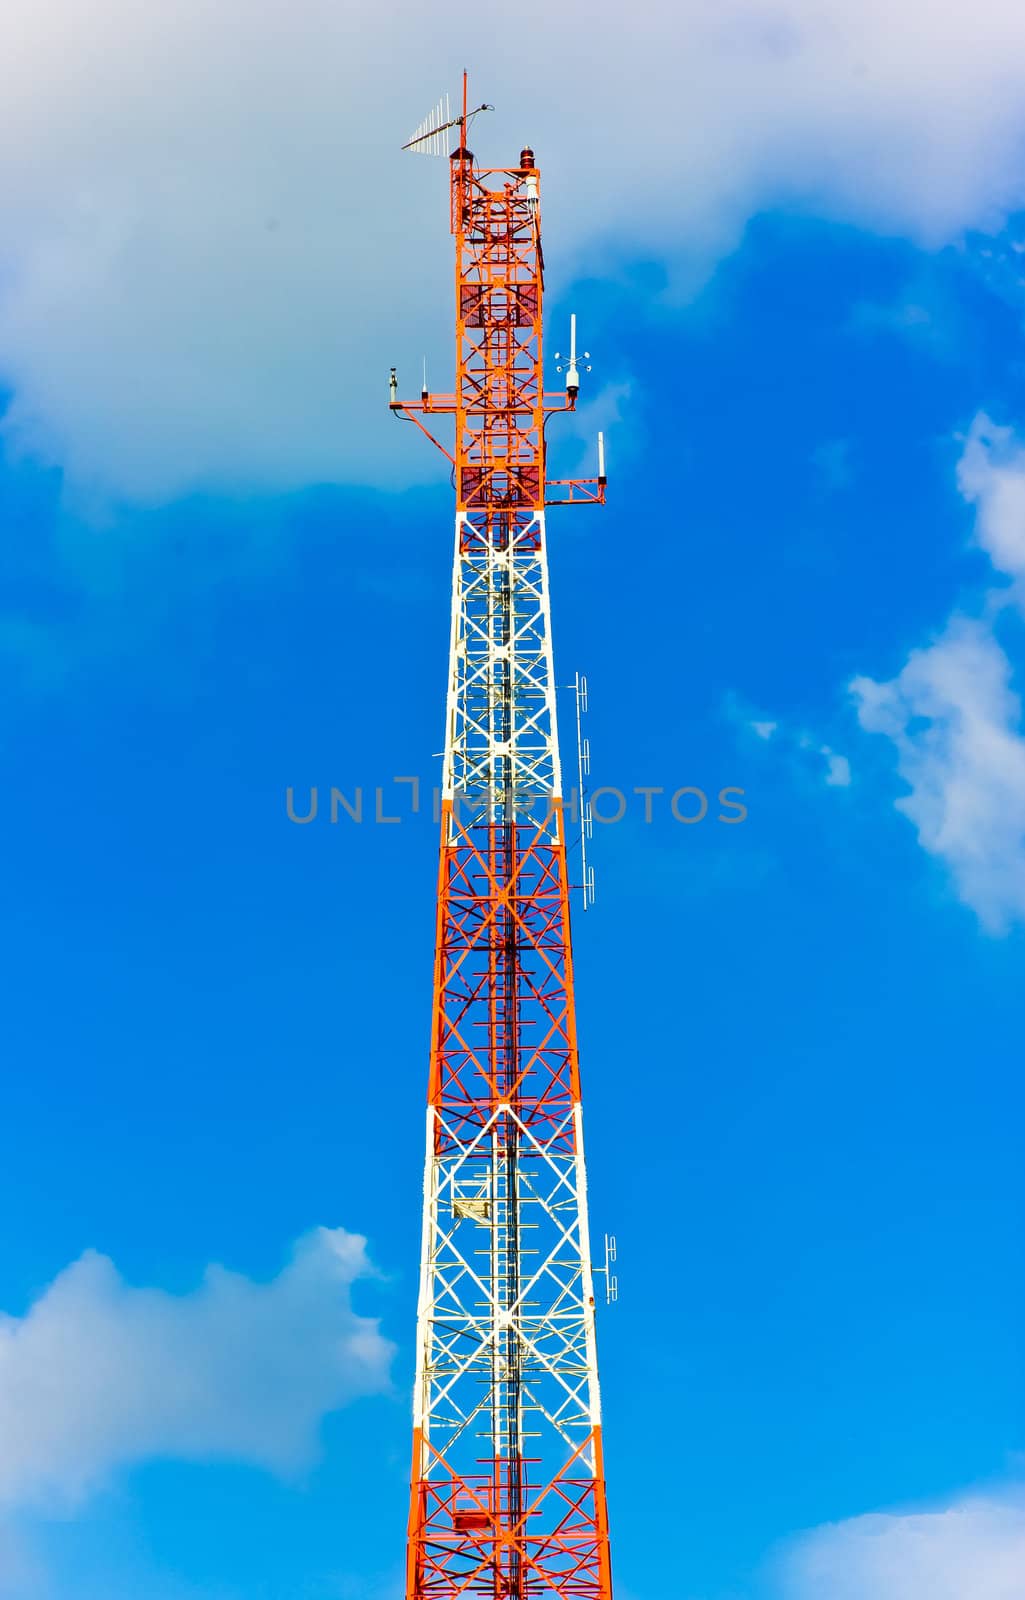 Radio tower and the blue sky and clouds by sutipp11